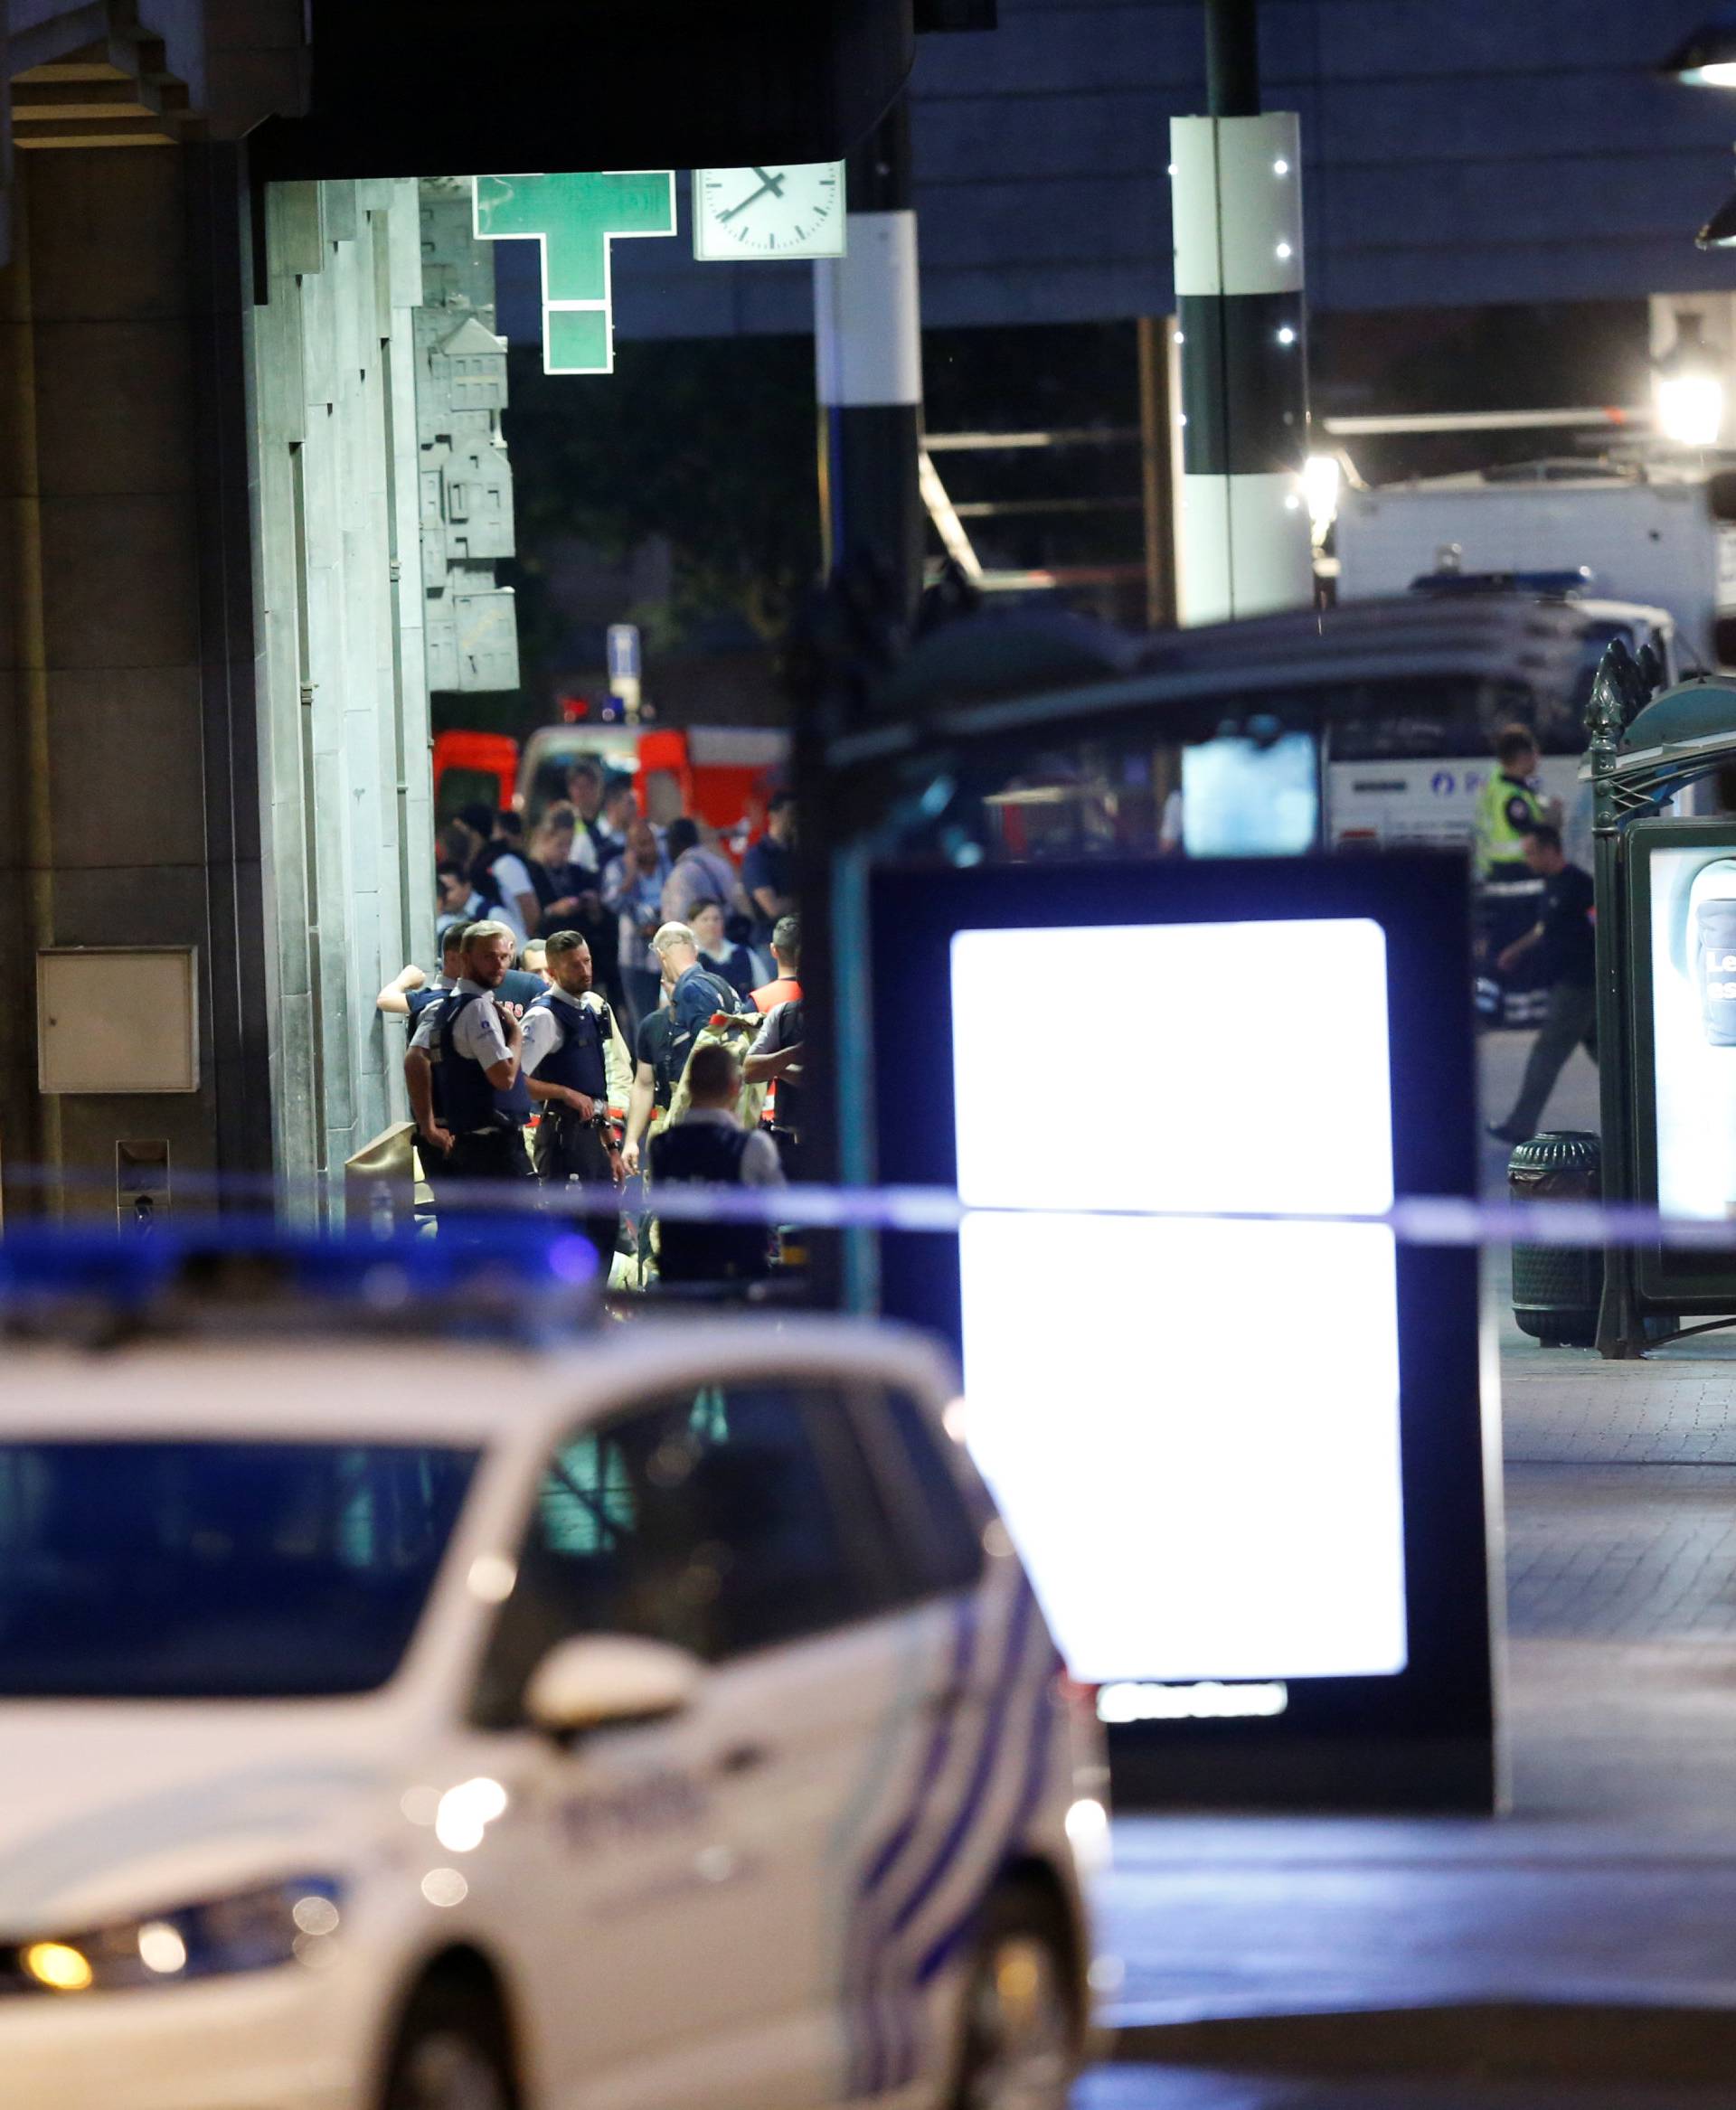 Security forces take up position following an explosion at the Central Station in Brussels.